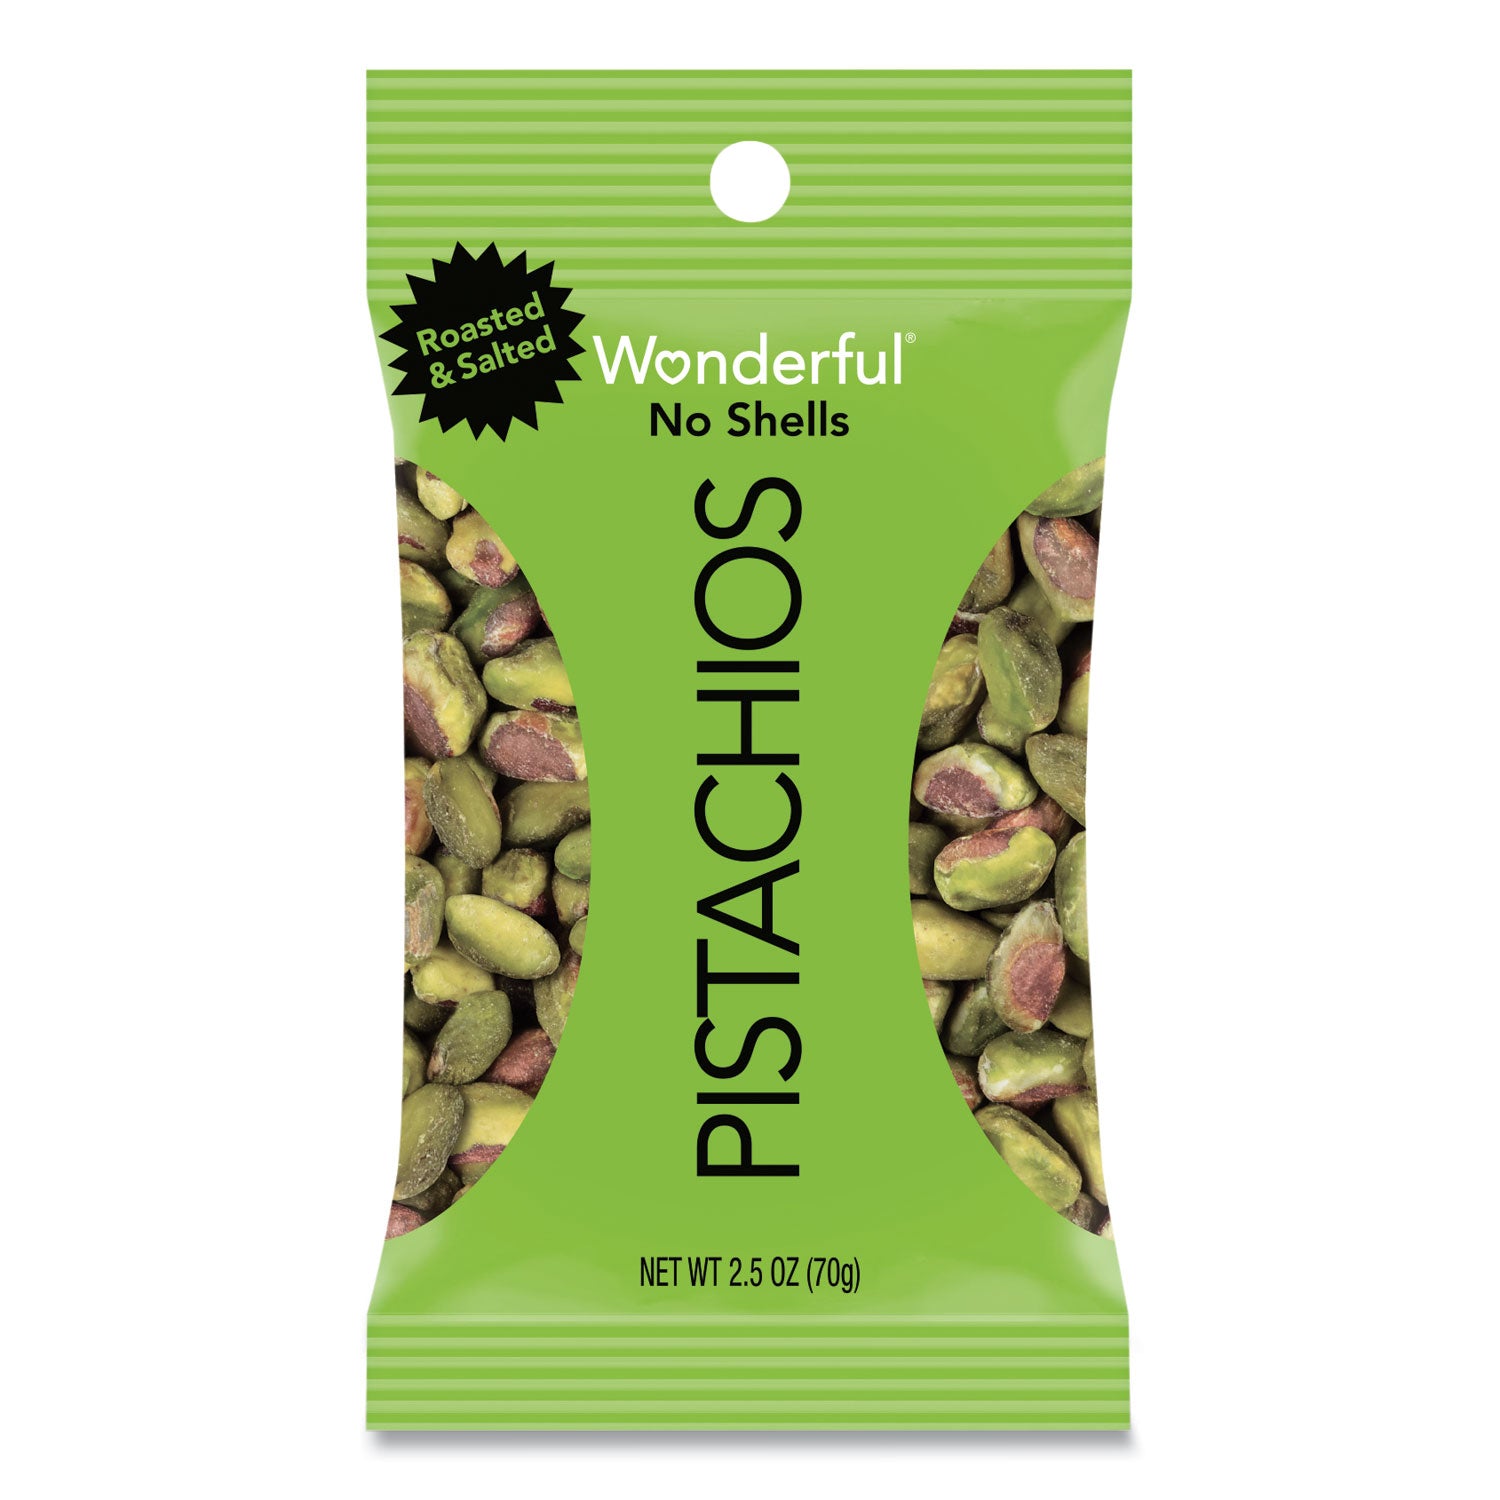 wonderful-pistachios-dry-roasted-and-salted-25-oz-8-box_pam070146a25m - 1